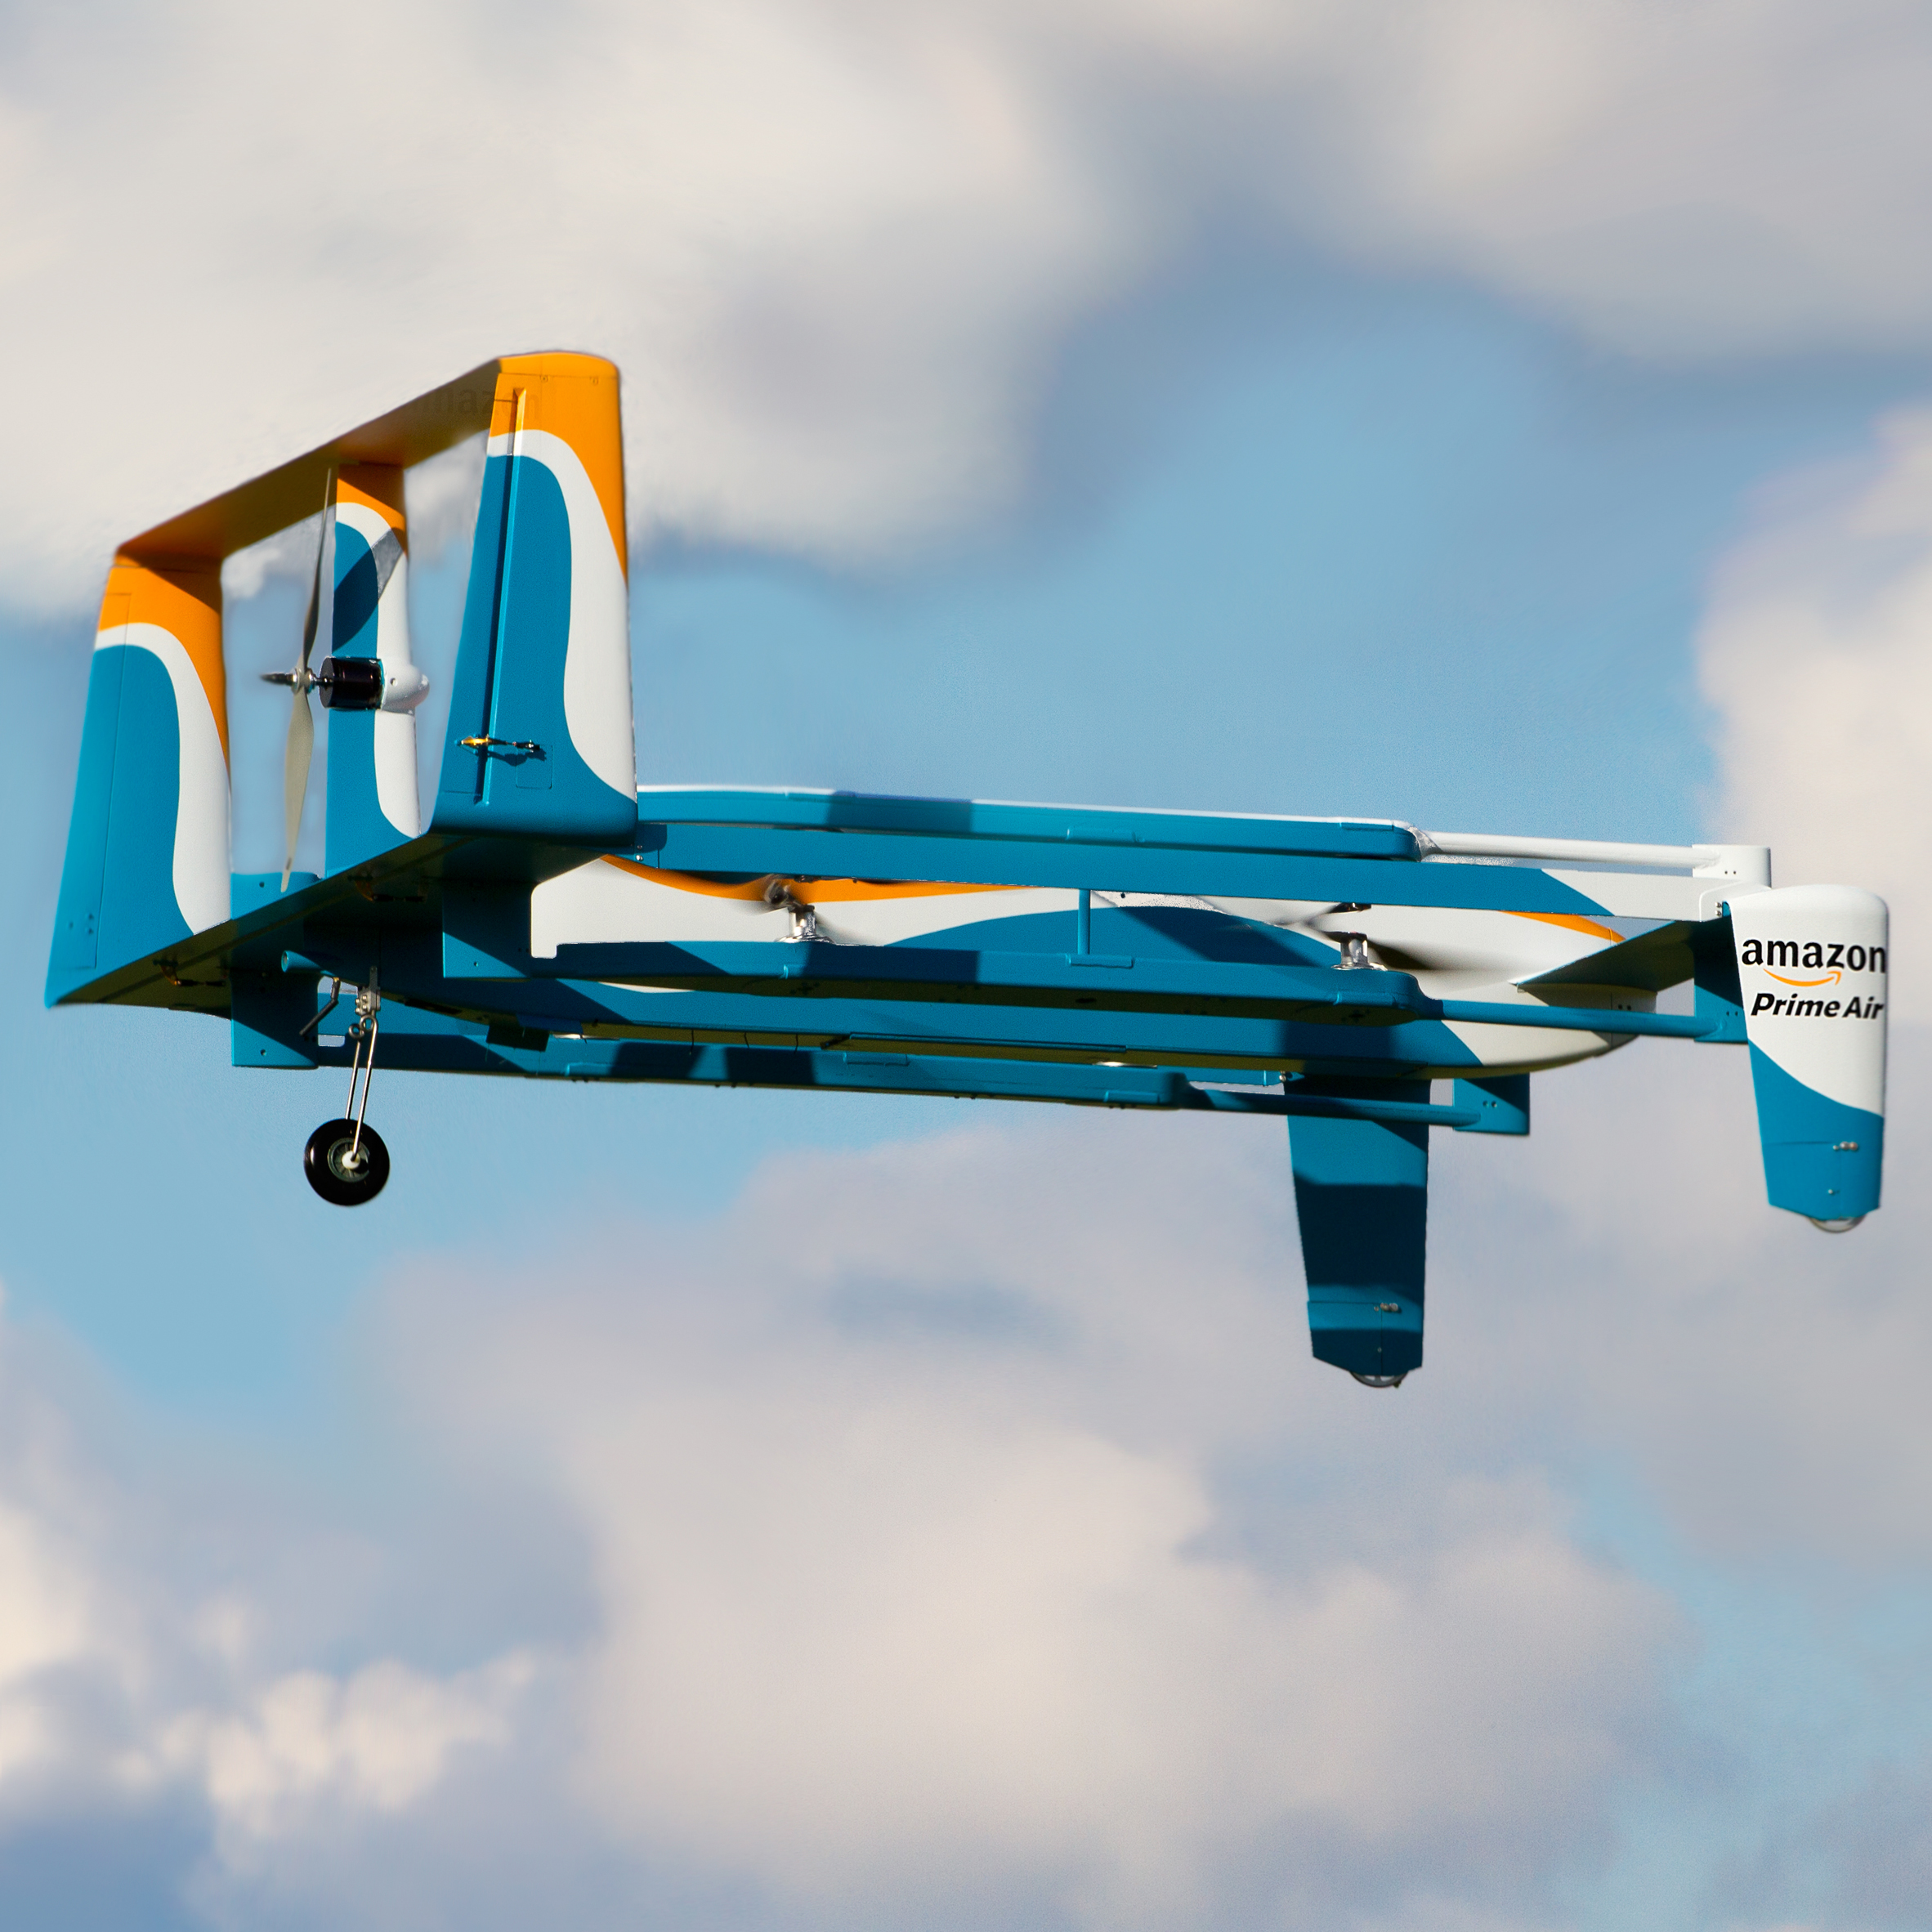 Amazon files patent for flying warehouses filled with drones